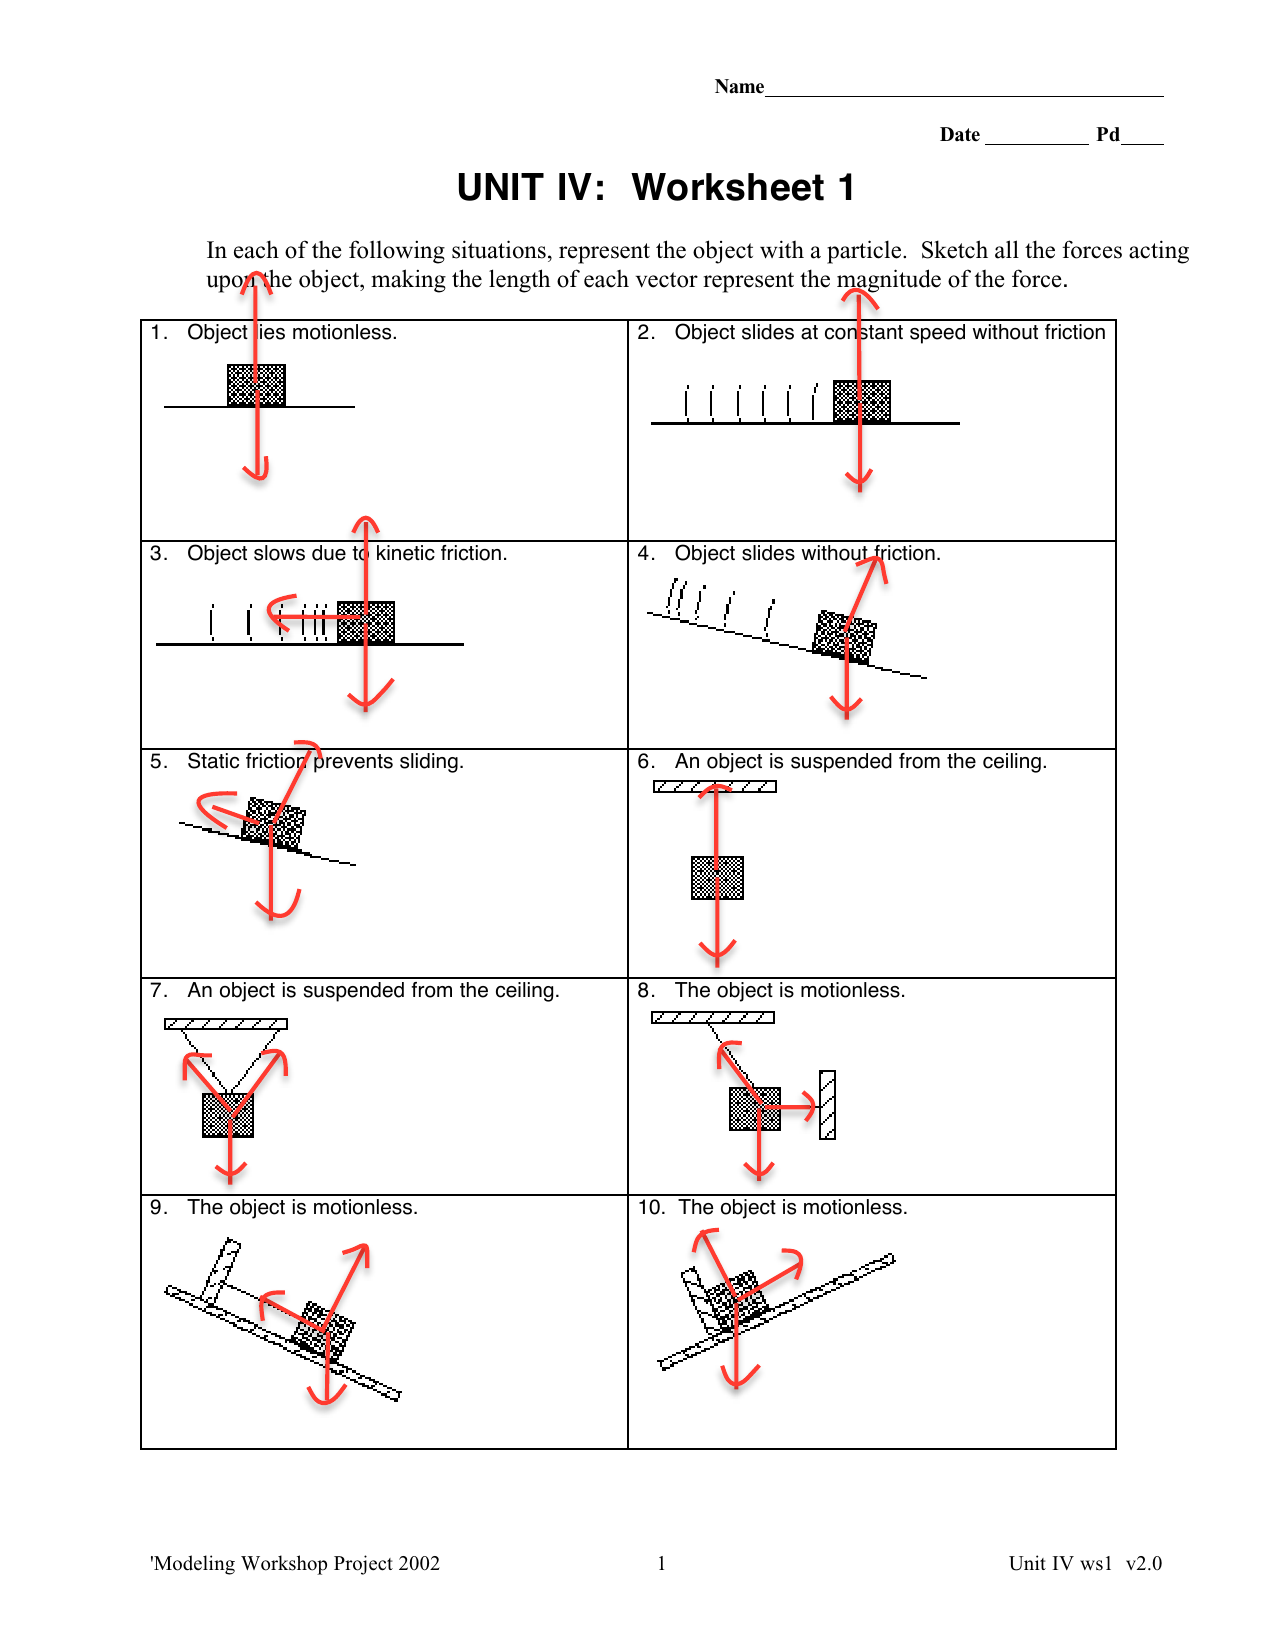 Drawing Force Diagrams Worksheet 2 Answers Googleoneone